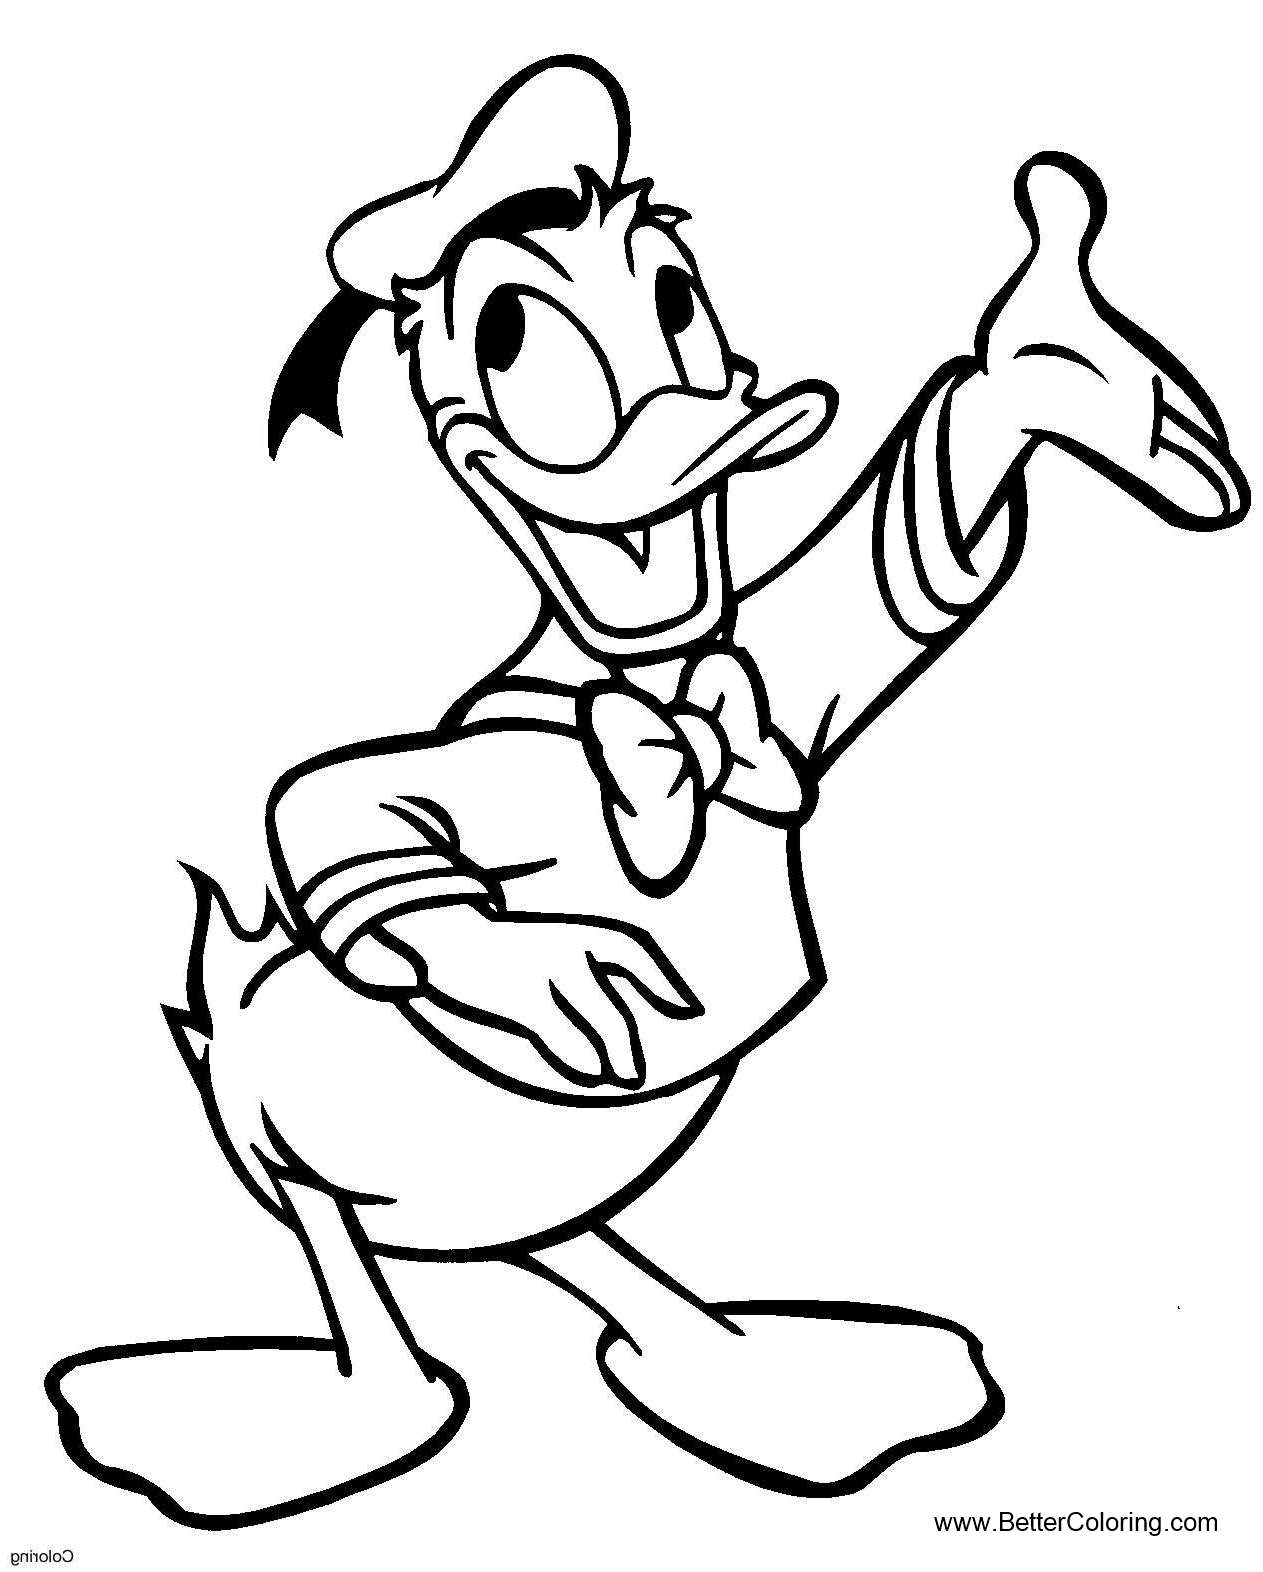 Free Donald Duck Coloring Pages Line Drawings printable